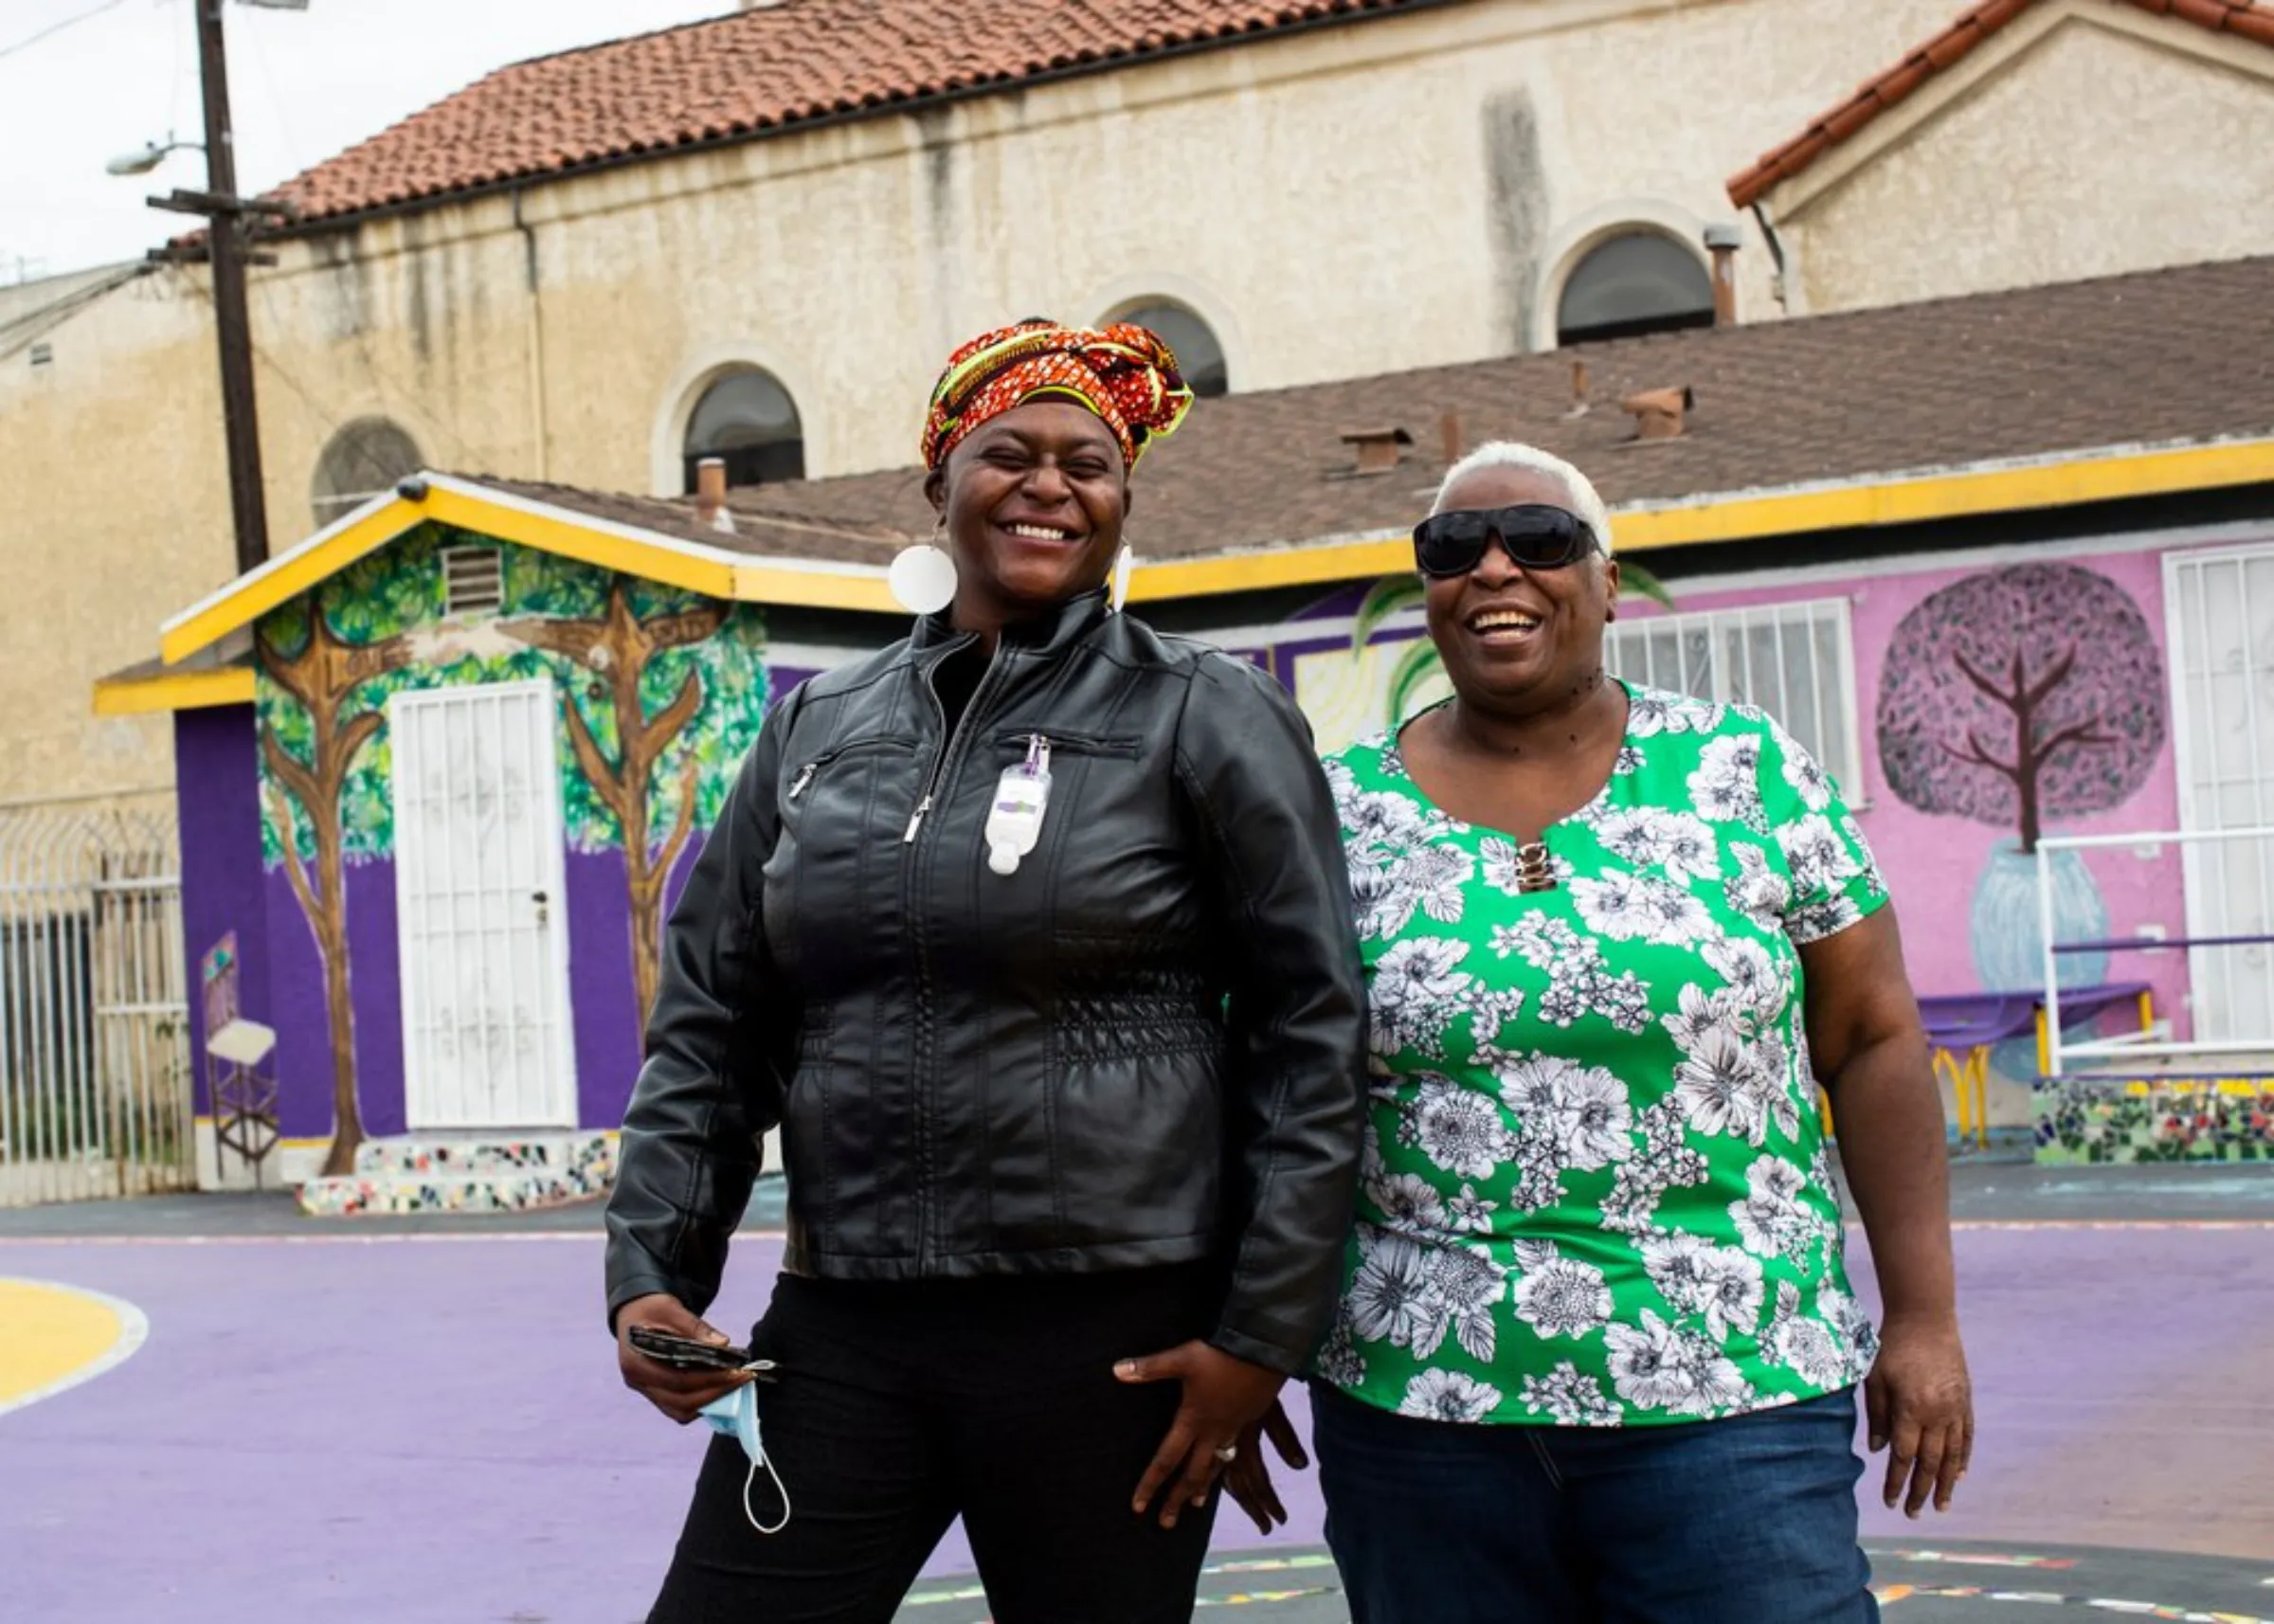 Community environmental justice activists Jaquelyn Badejo (L) and her mother Linda Cleveland (R) stand in their Watts neighborhood in southern Los Angeles, California, May 17, 2021